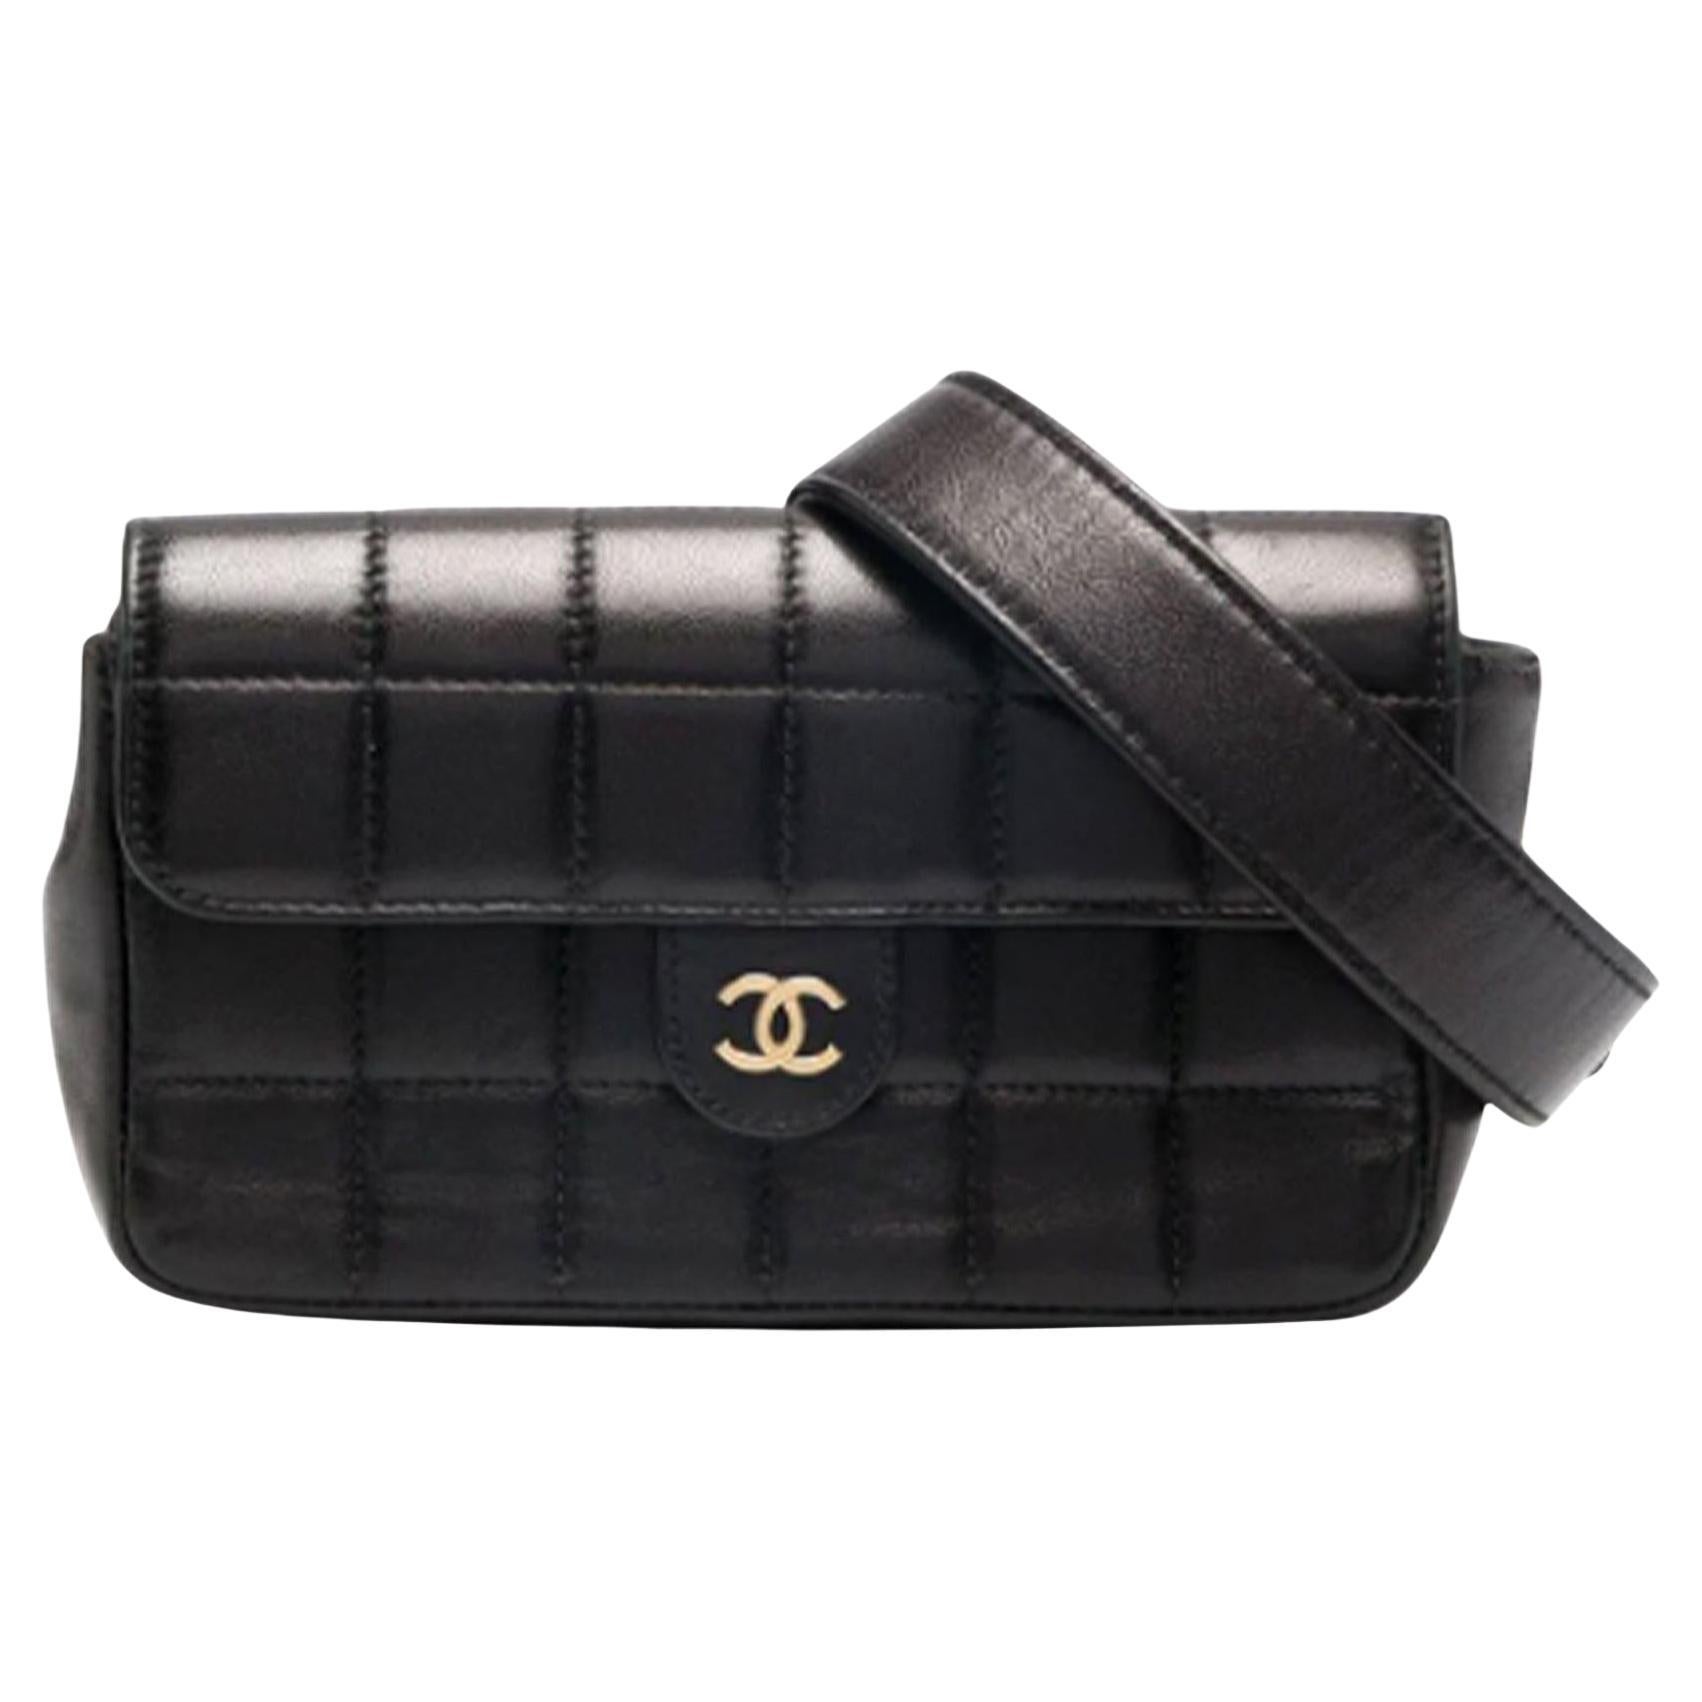 Vintage Chanel square quilted caviar classic flap shaped fanny pack waist bag

2004 {VINTAGE 18 Years}
Gold hardware
Exterior black lambskin leather
Interior lambskin lining
Back card holder
Waist belt is 36